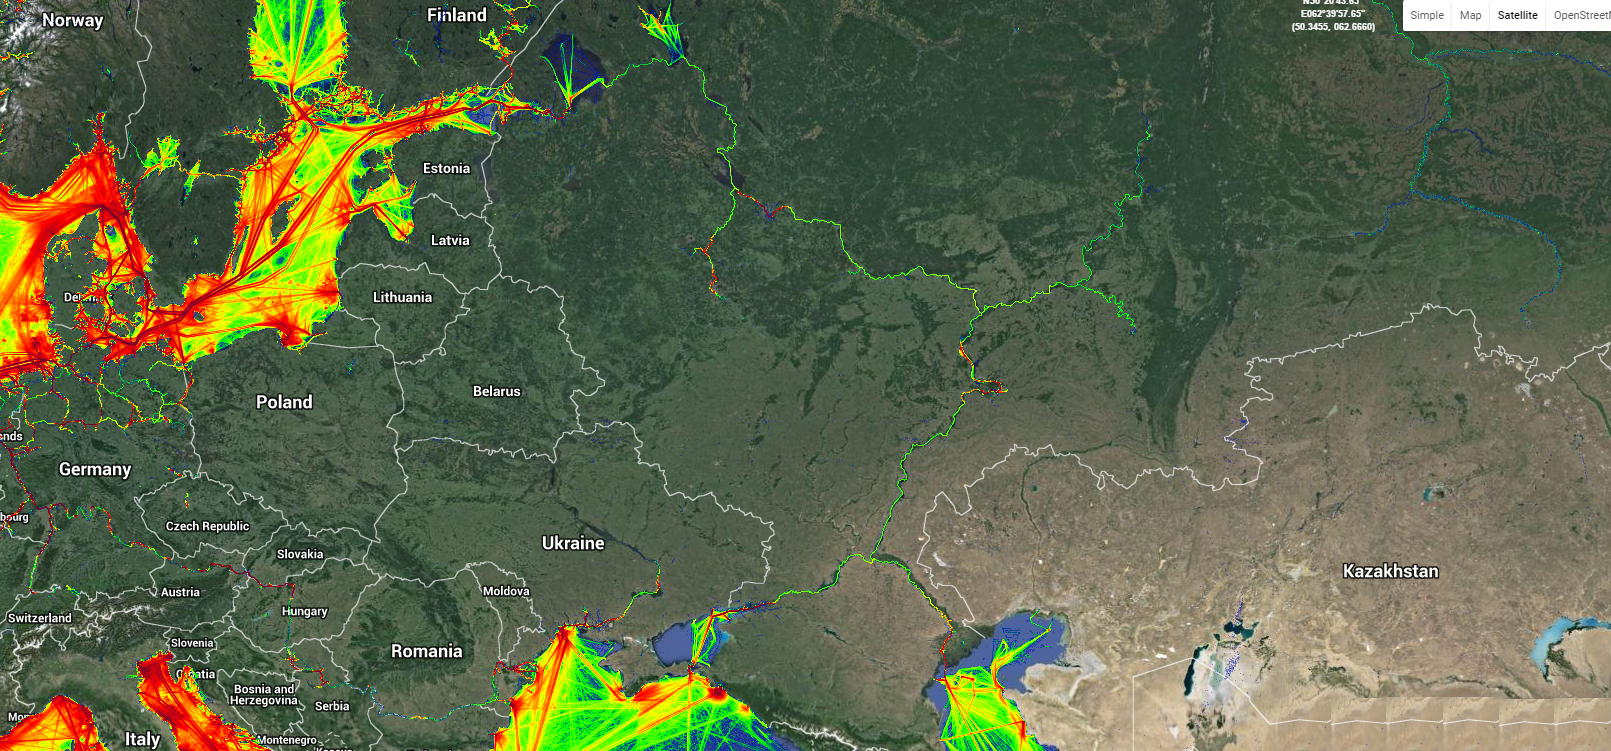 Live Marine Traffic, Density Map and Current Position of ships in VOLGA RIVER